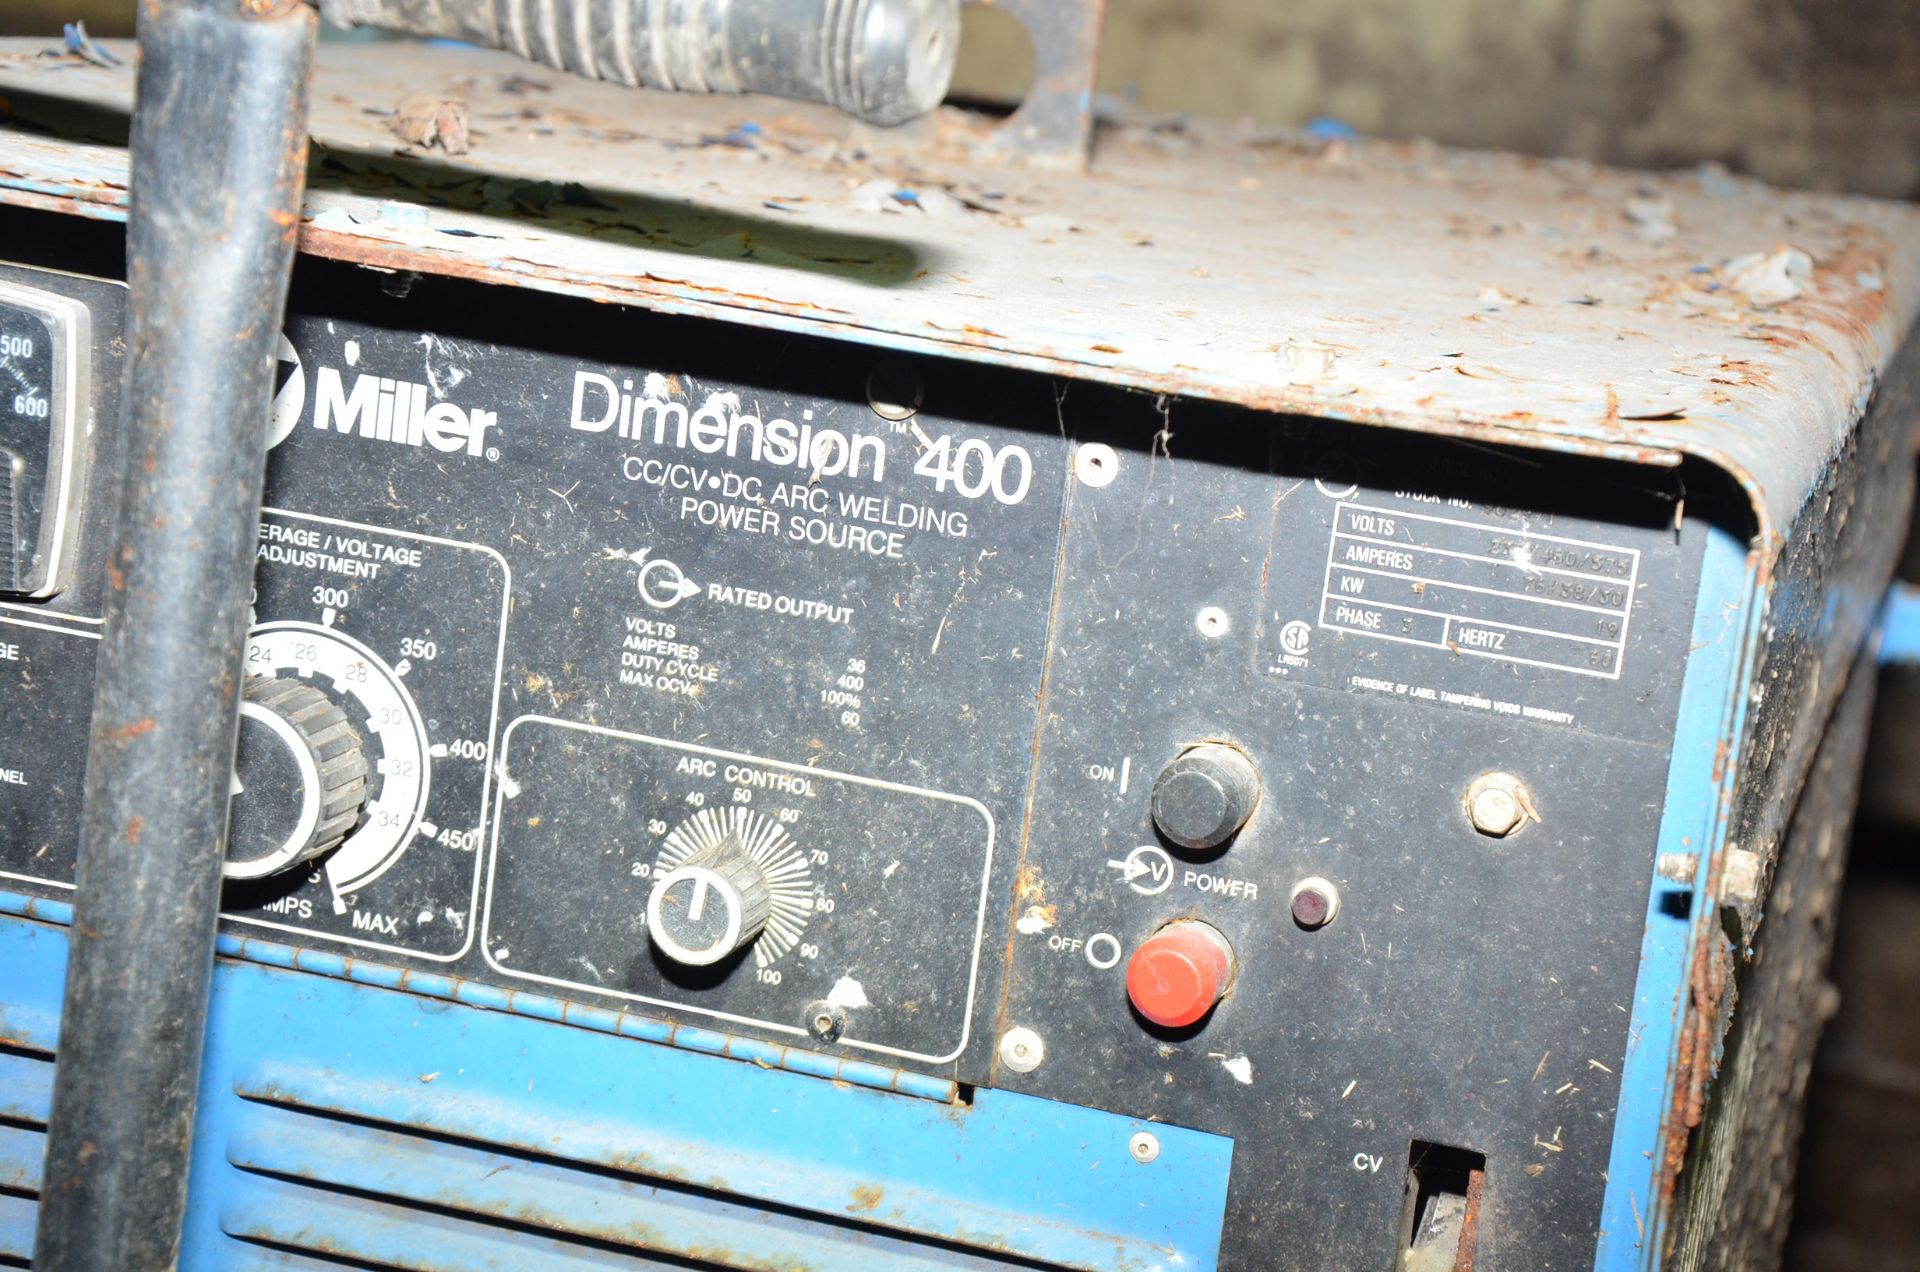 MILLER DIMENSION 400 CC/CV-DC ARC WELDING POWER SOURCE, S/N N/A [RIGGING FEES FOR LOT #790 - $85 USD - Image 2 of 2